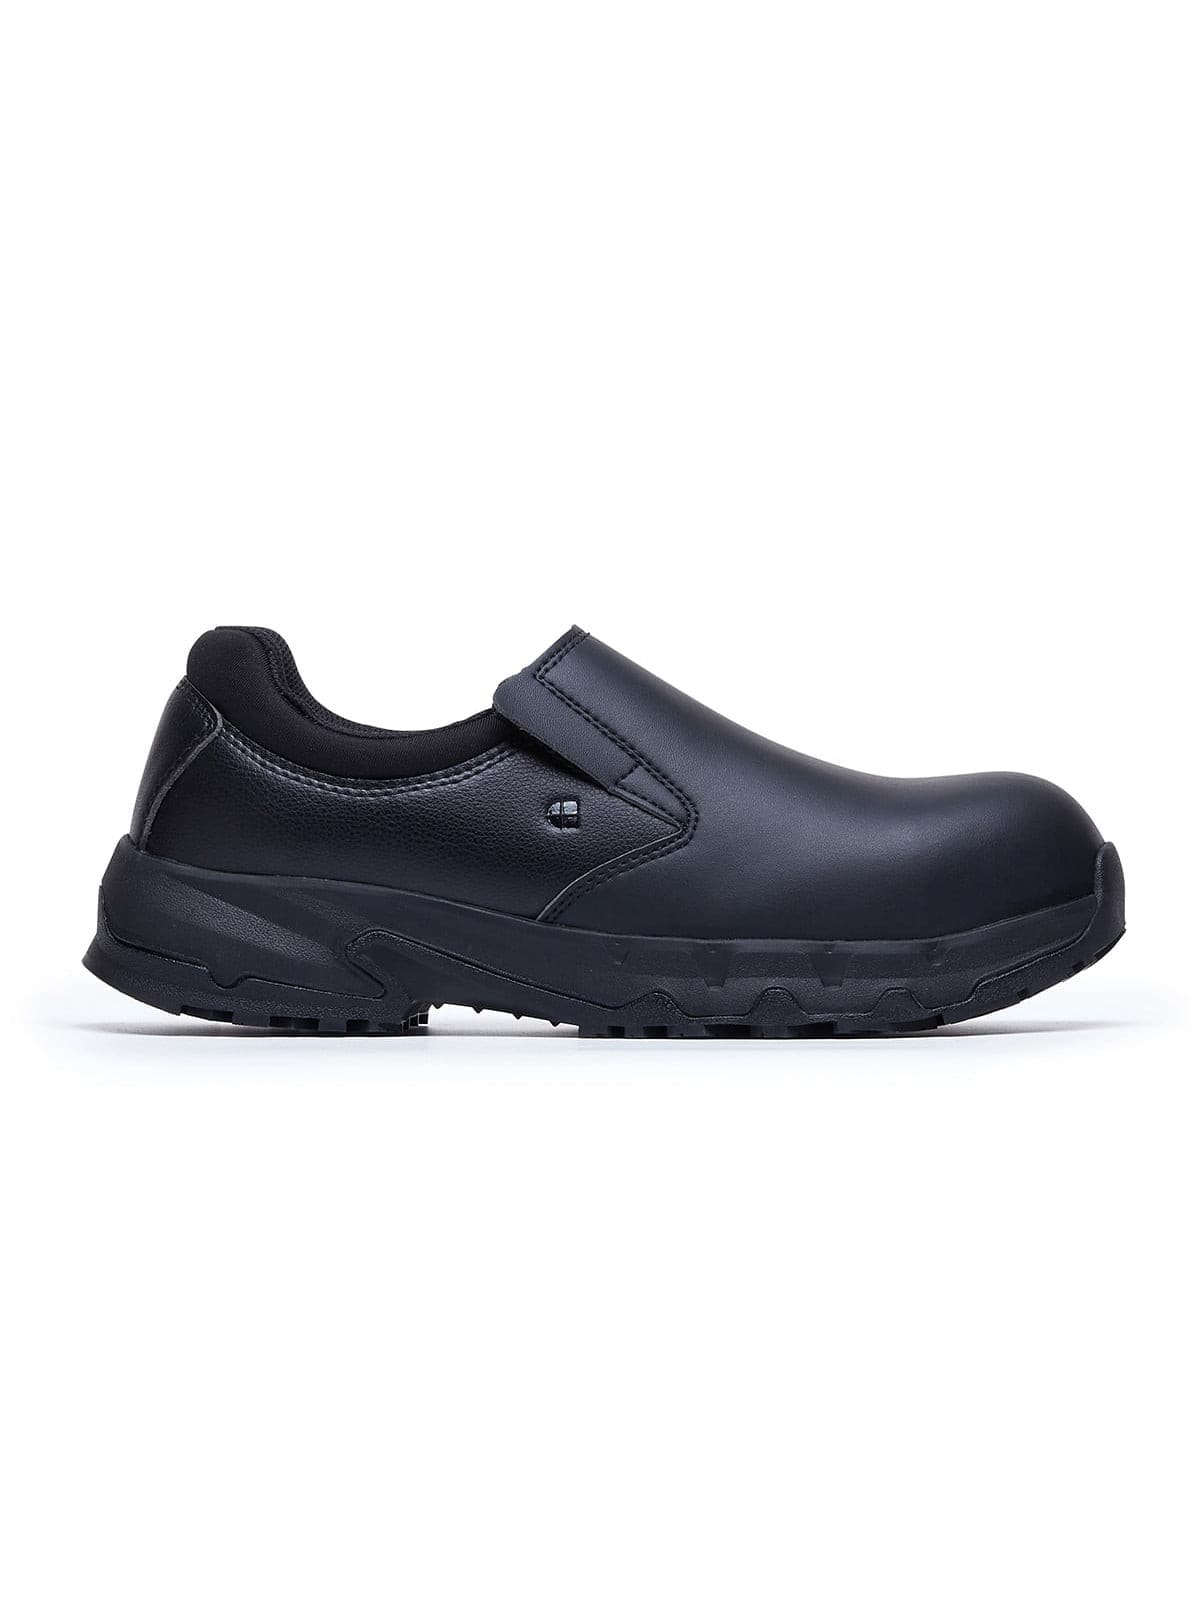 Unisex Safety Shoe Brandon Black (S3) by  Shoes For Crews.